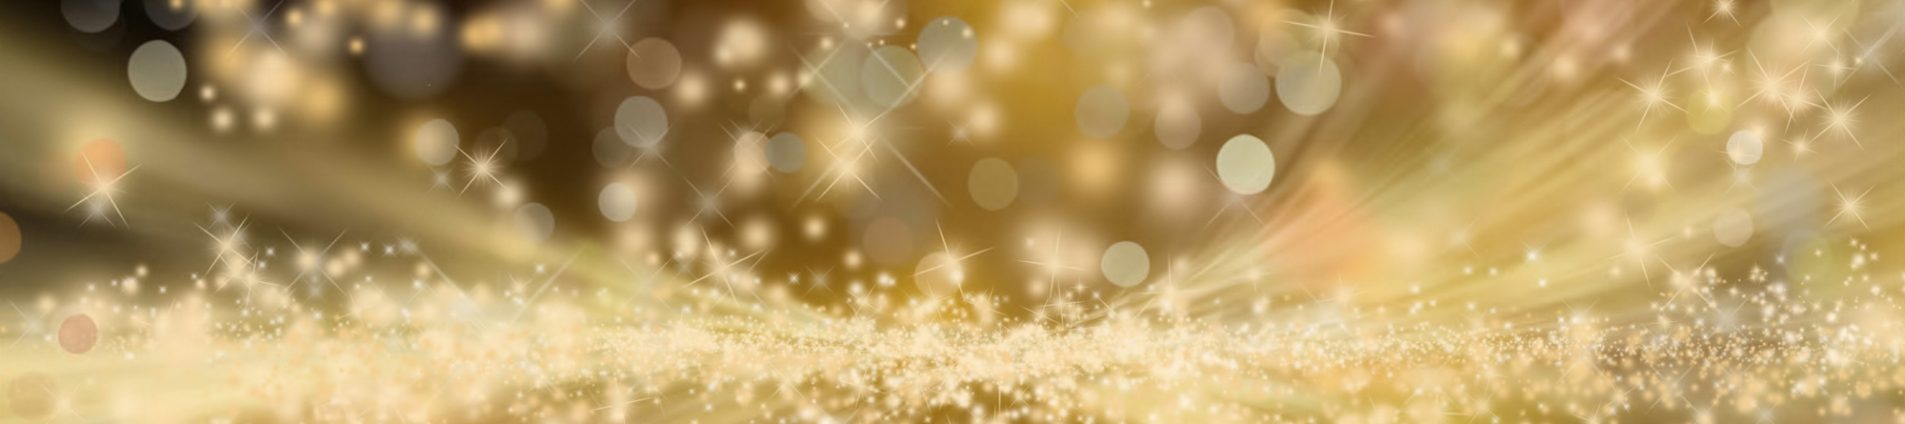 golden festive background, abstract sparkle background